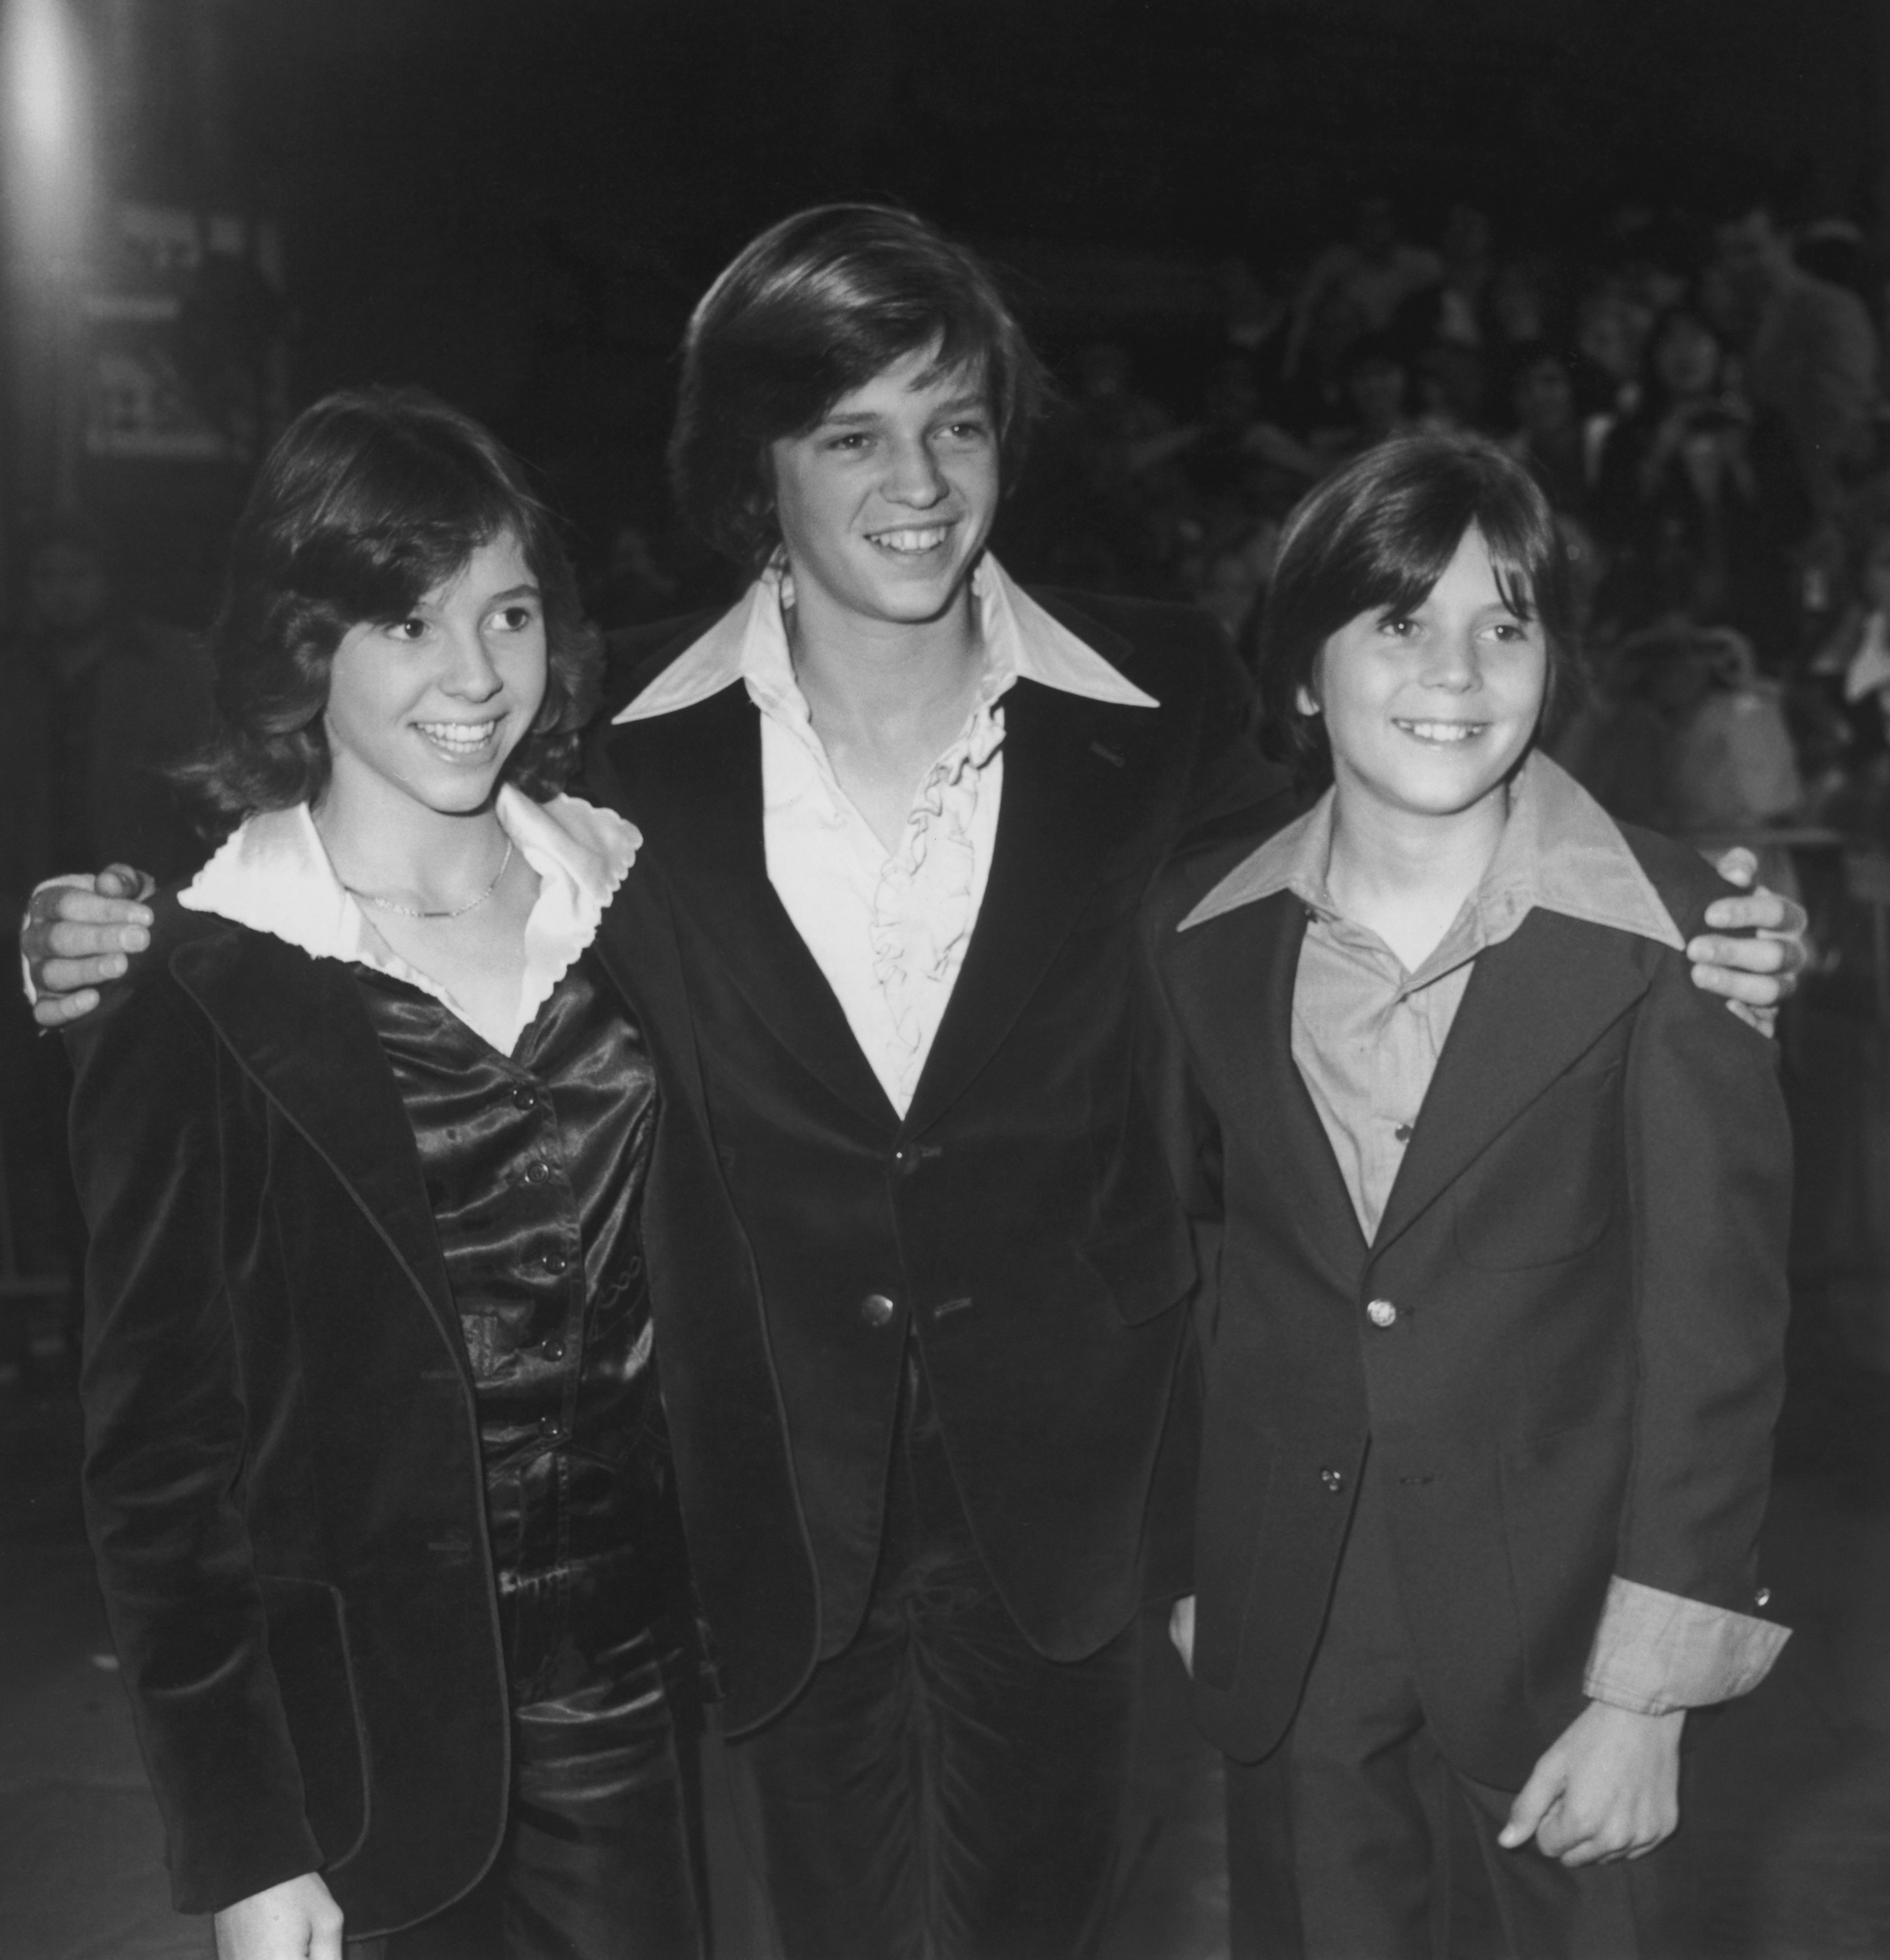 Kristy McNichol at the Hollywood premiere of "Saturday Night Fever" with her brothers Jimmy and Tommy, December 1977. | Source: Frank Edwards/Fotos International/Archive Photos/Getty Images